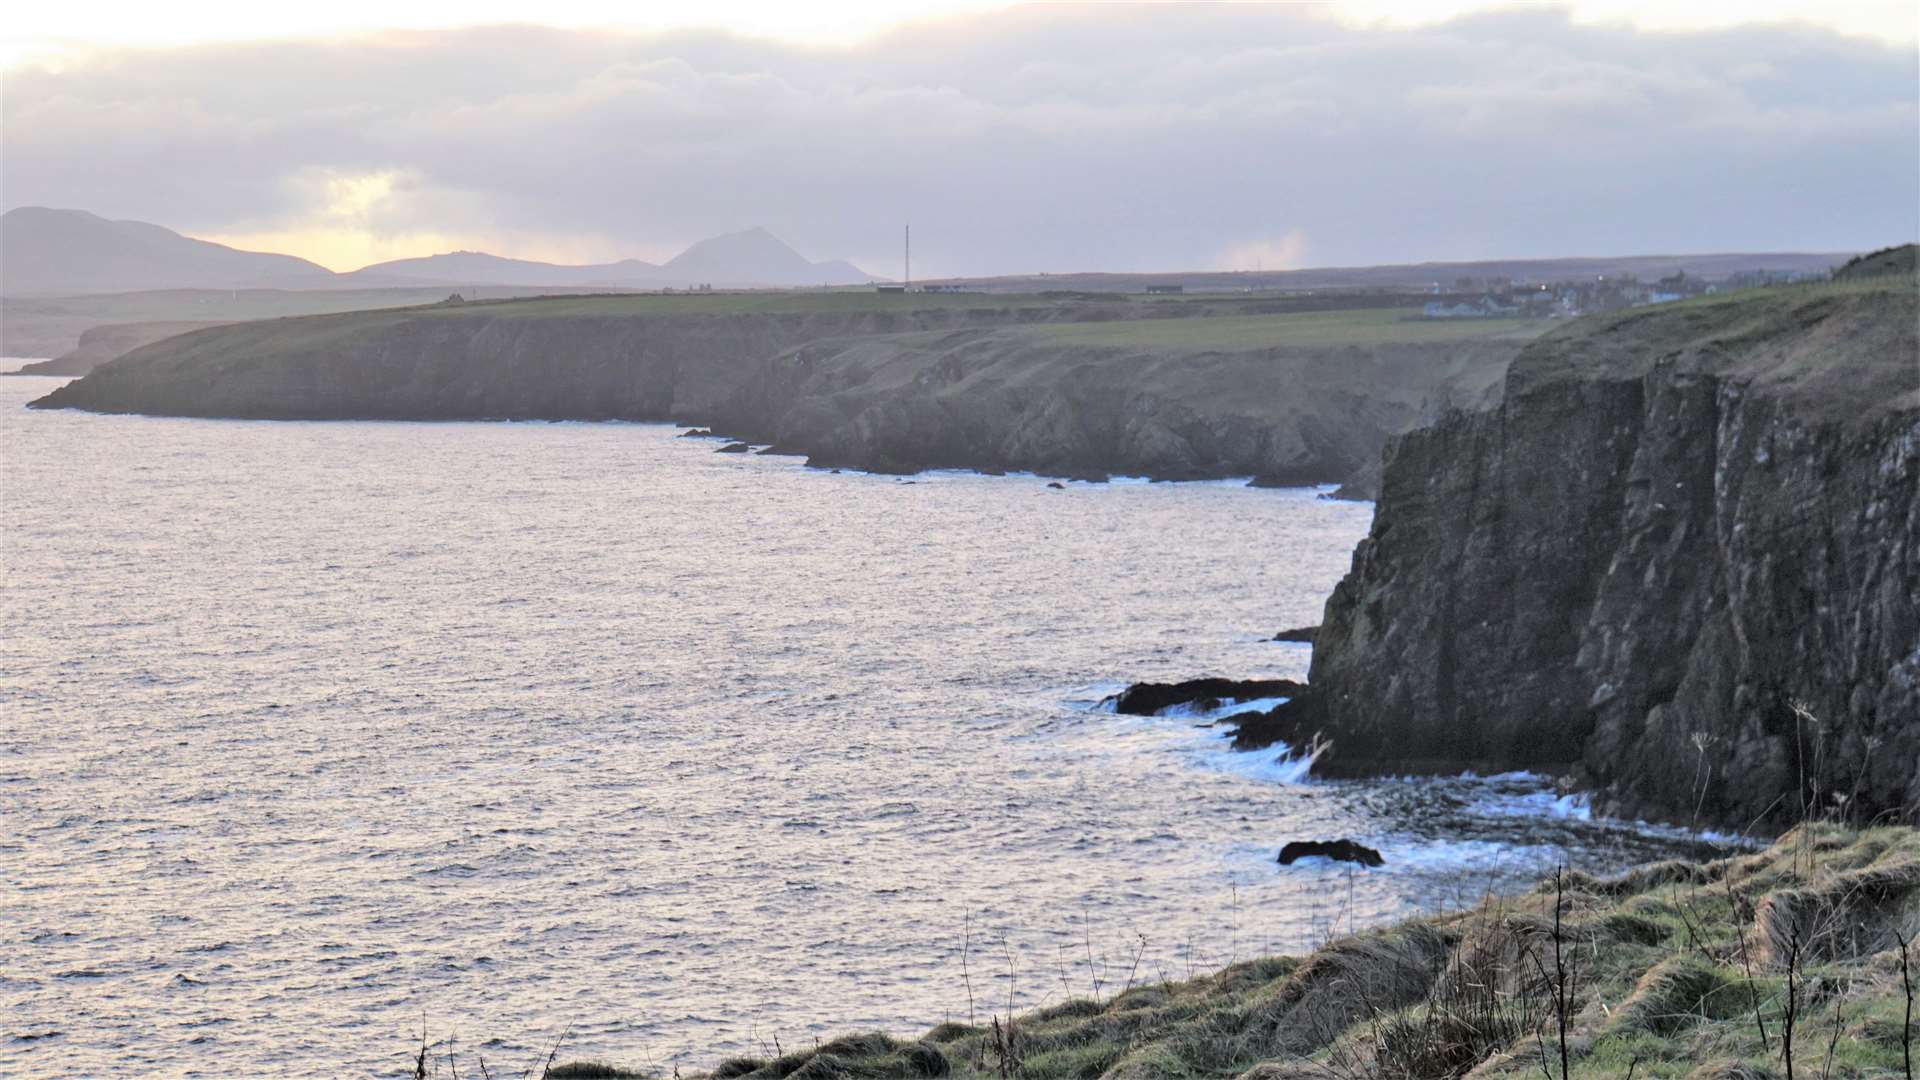 The coastline at Occumster where Stefan Sutherland's body was discovered in 2013. Picture: DGS